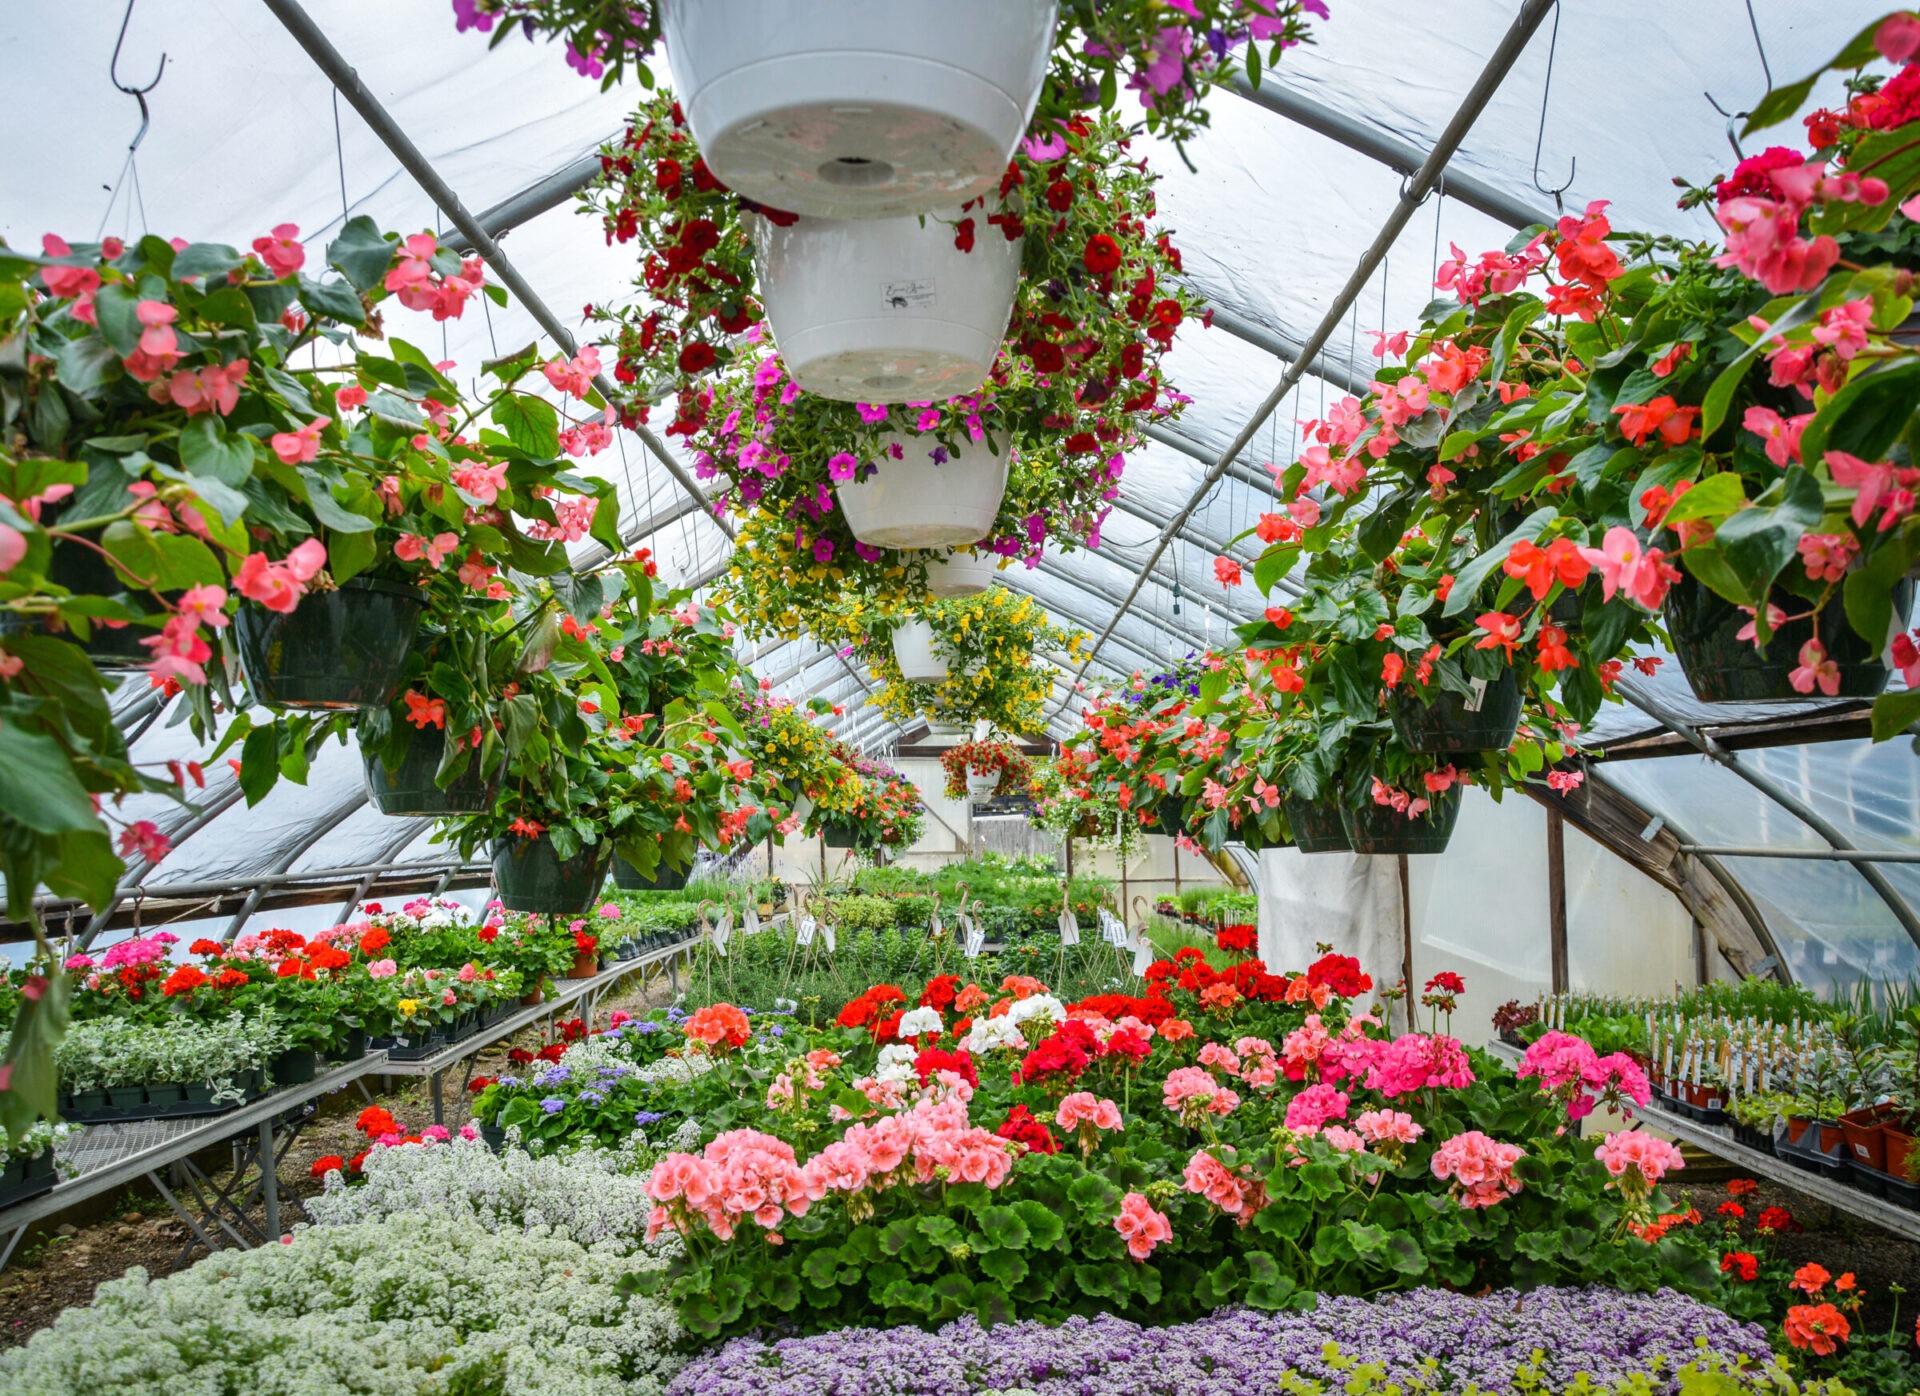 A vibrant greenhouse full of various blooming flowers arranged on shelves and hanging planters, with a translucent ceiling filtering daylight.